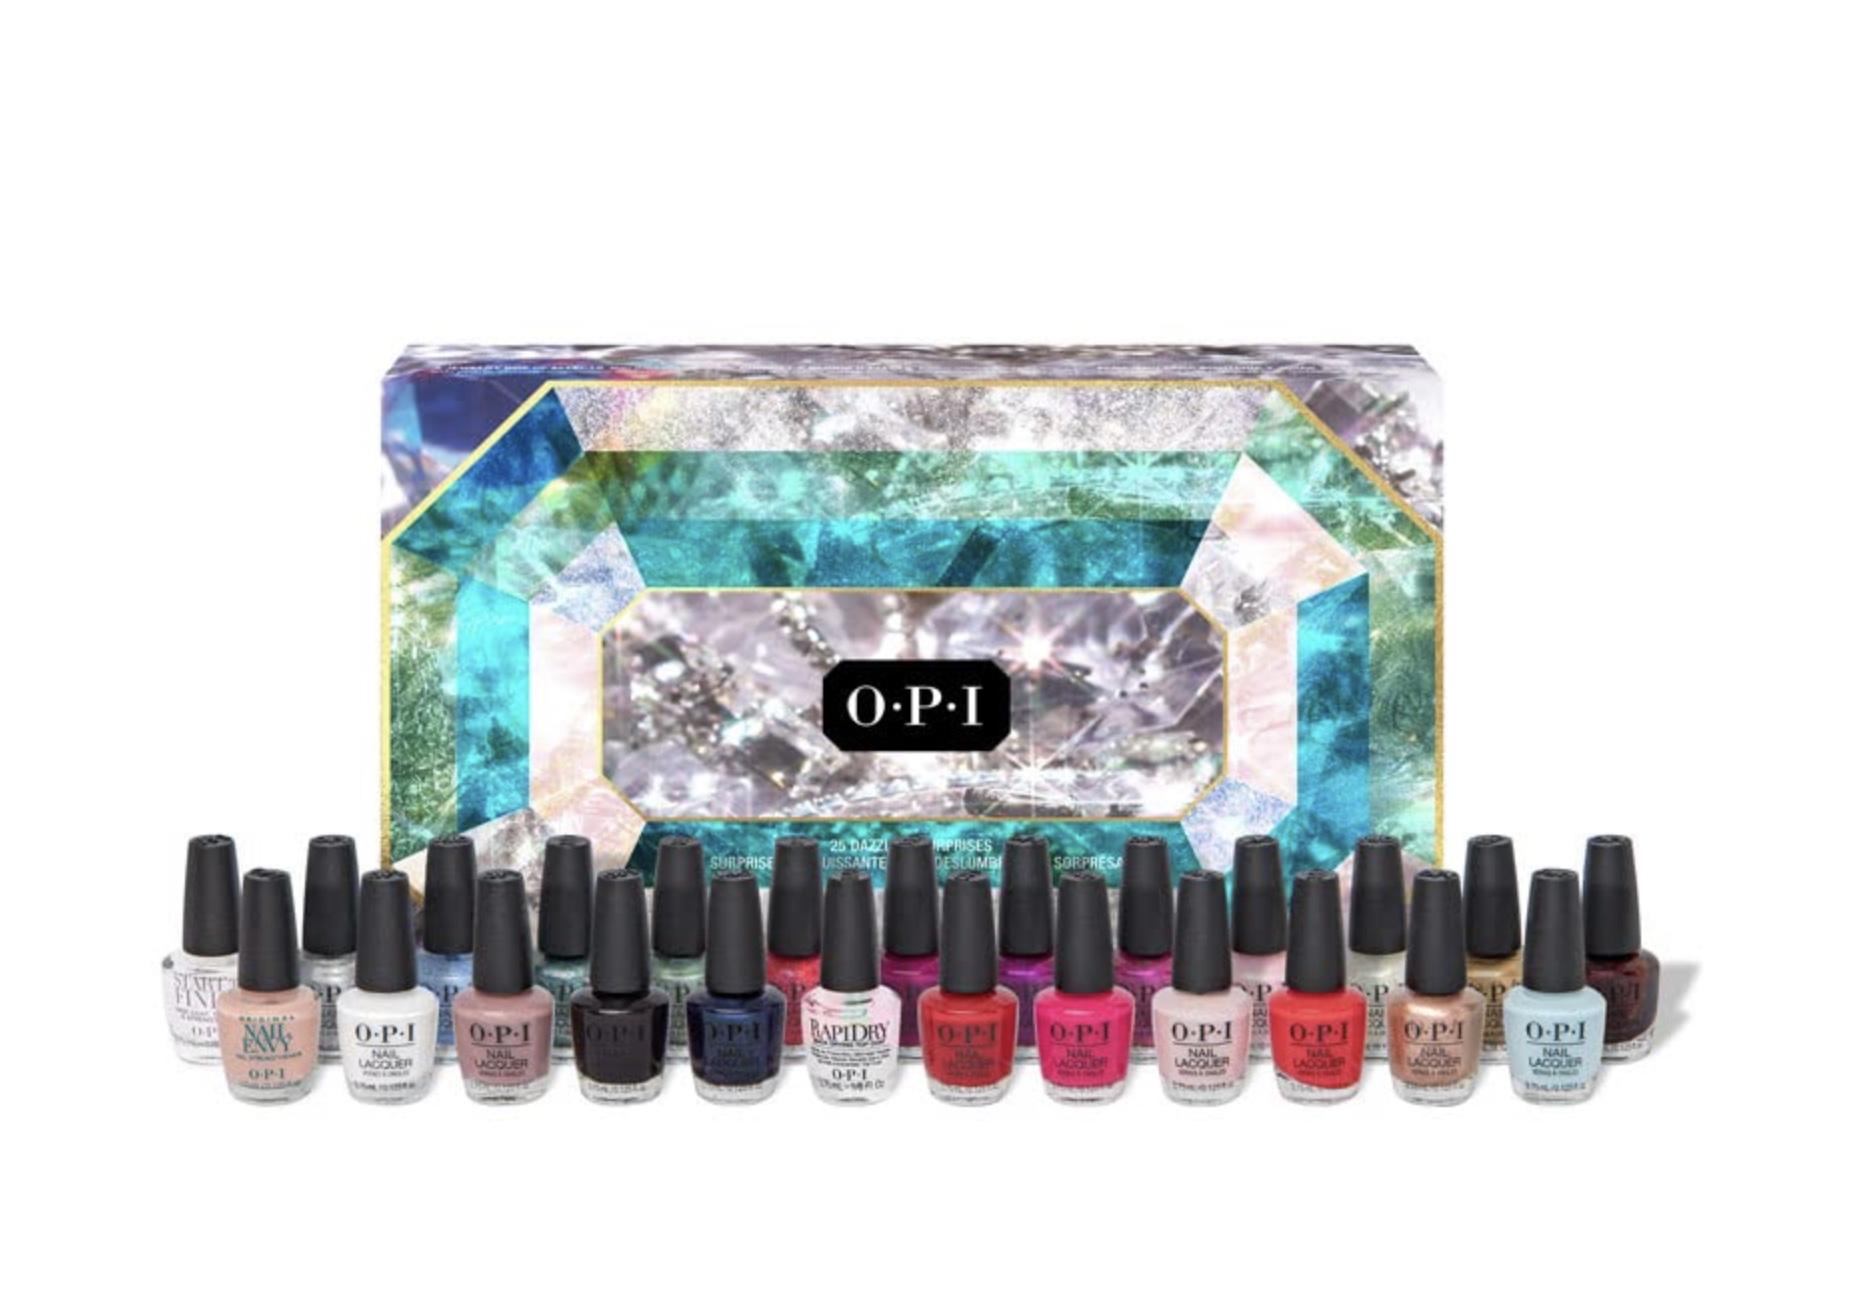 OPI Gift Set, Nail Lacquer Mini 25 pc Advent Calendar – On Sale Now